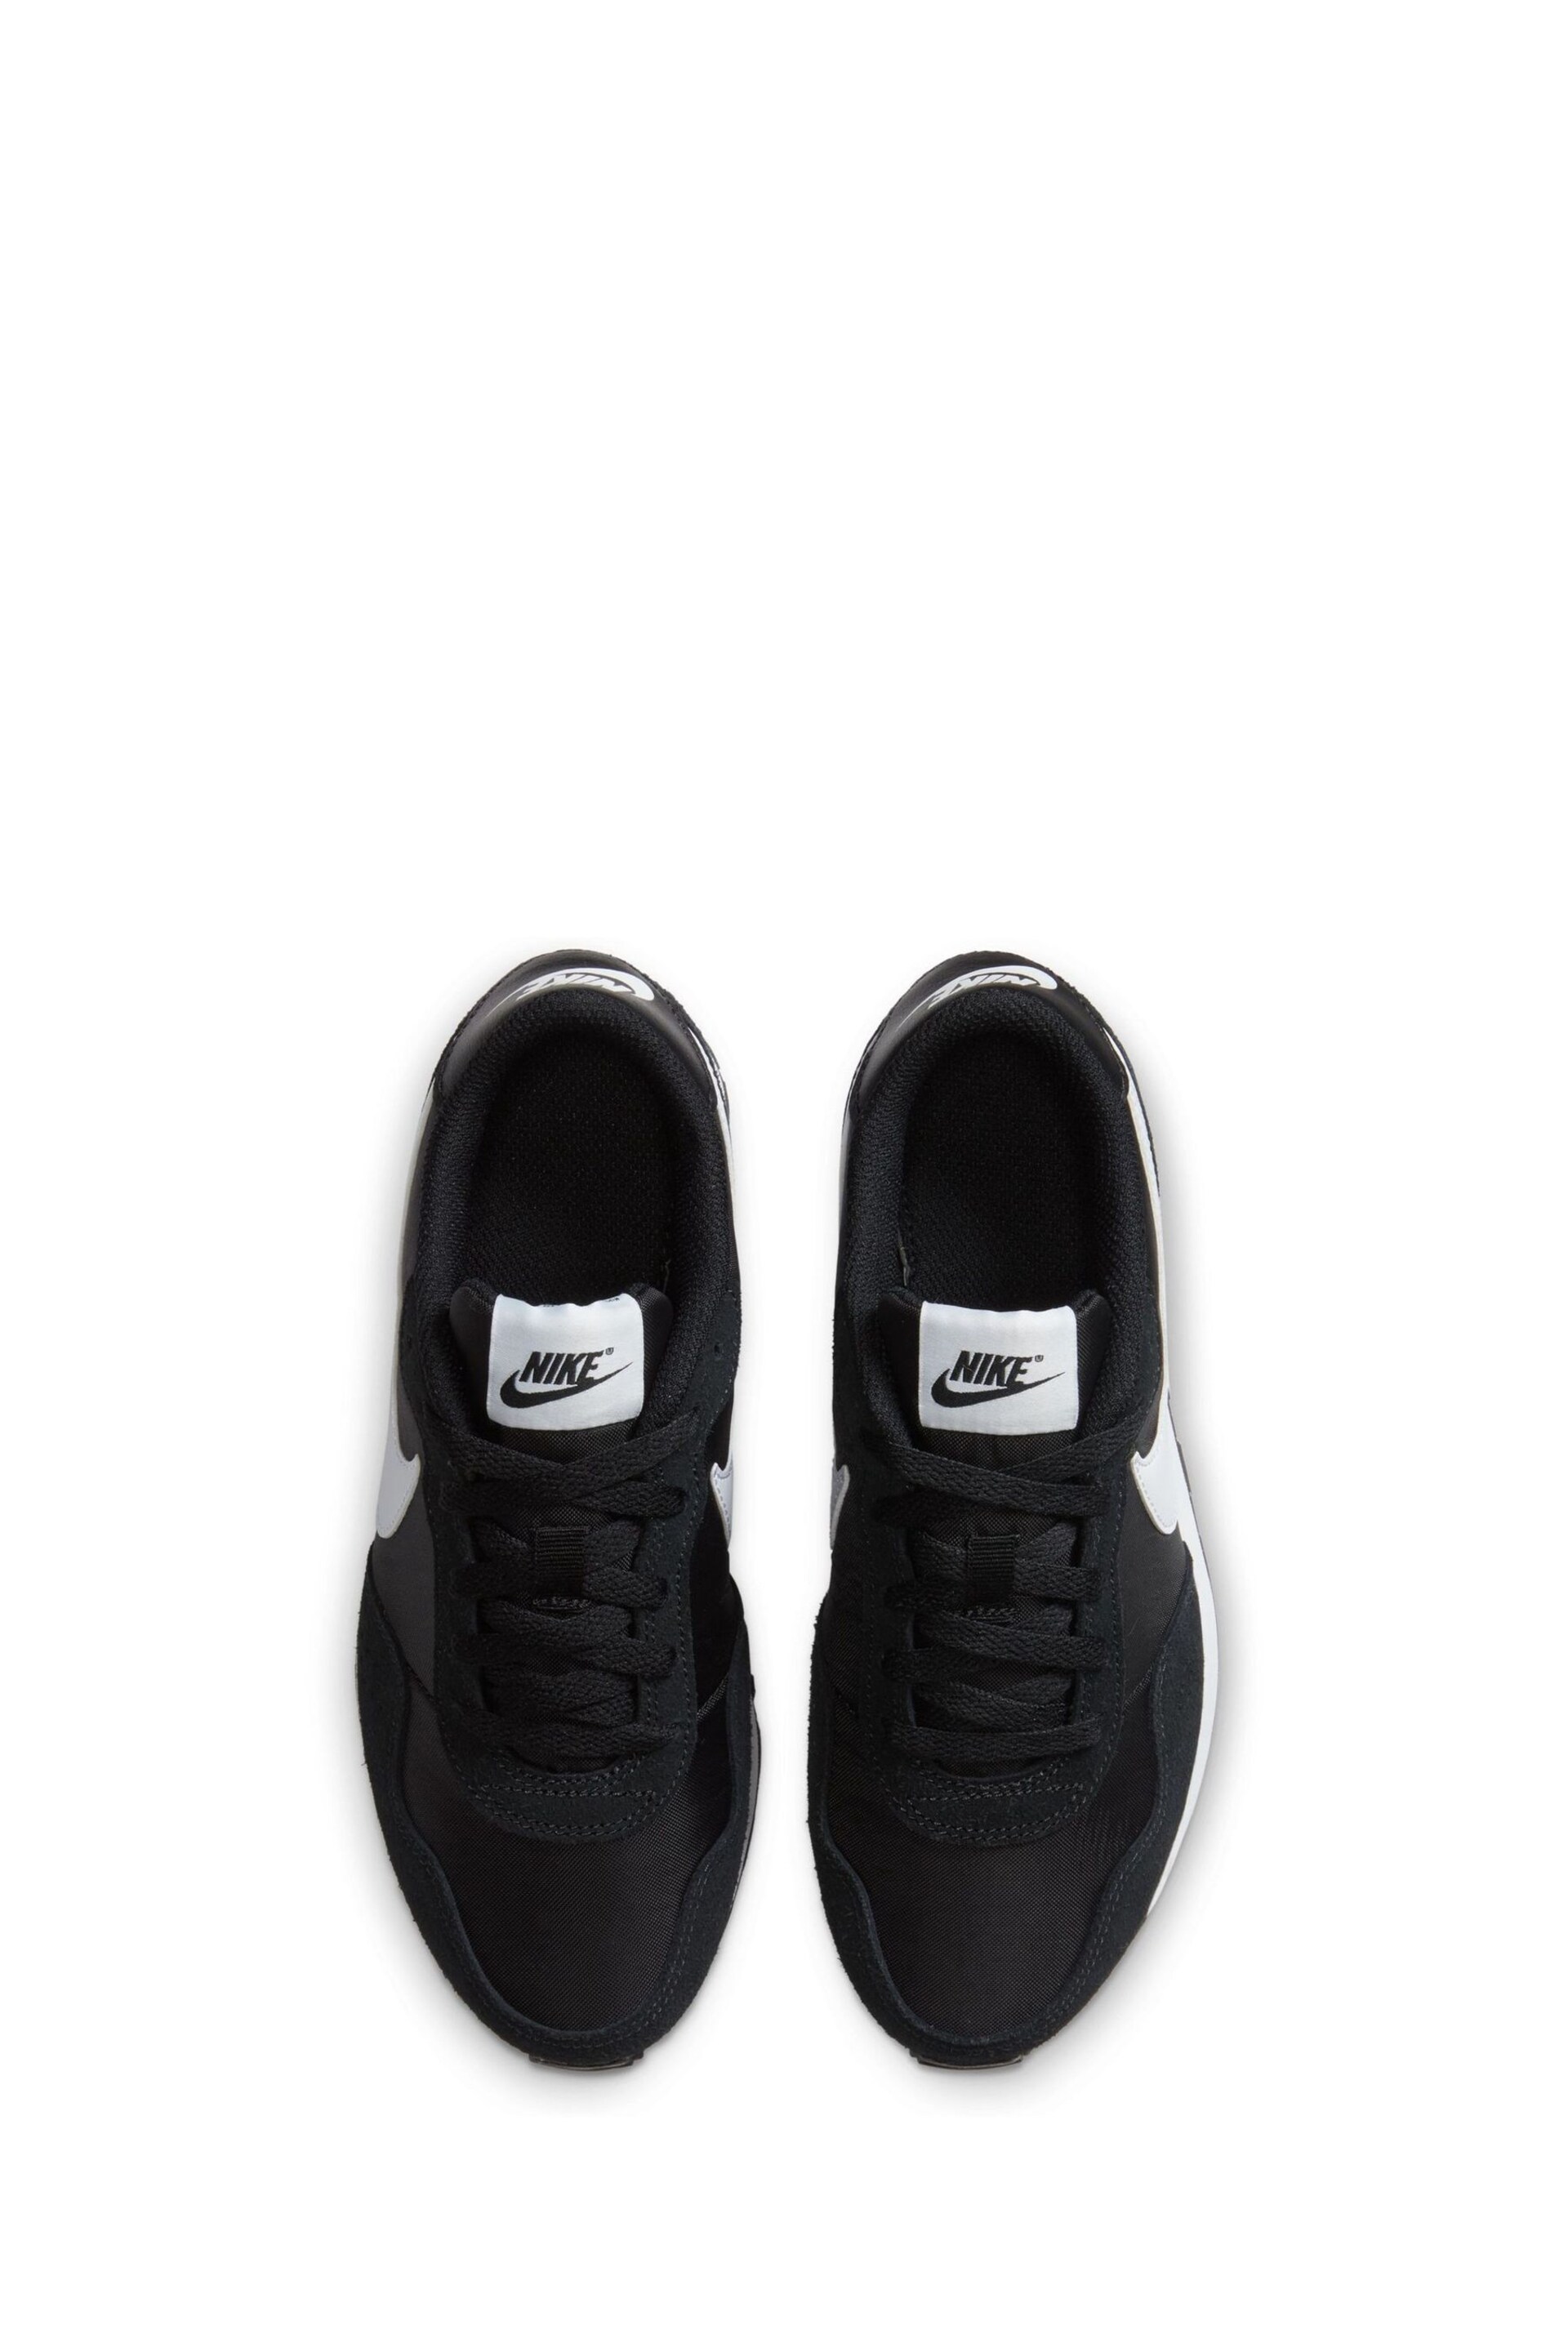 Nike Black/White Youth MD Valiant Trainers - Image 7 of 10